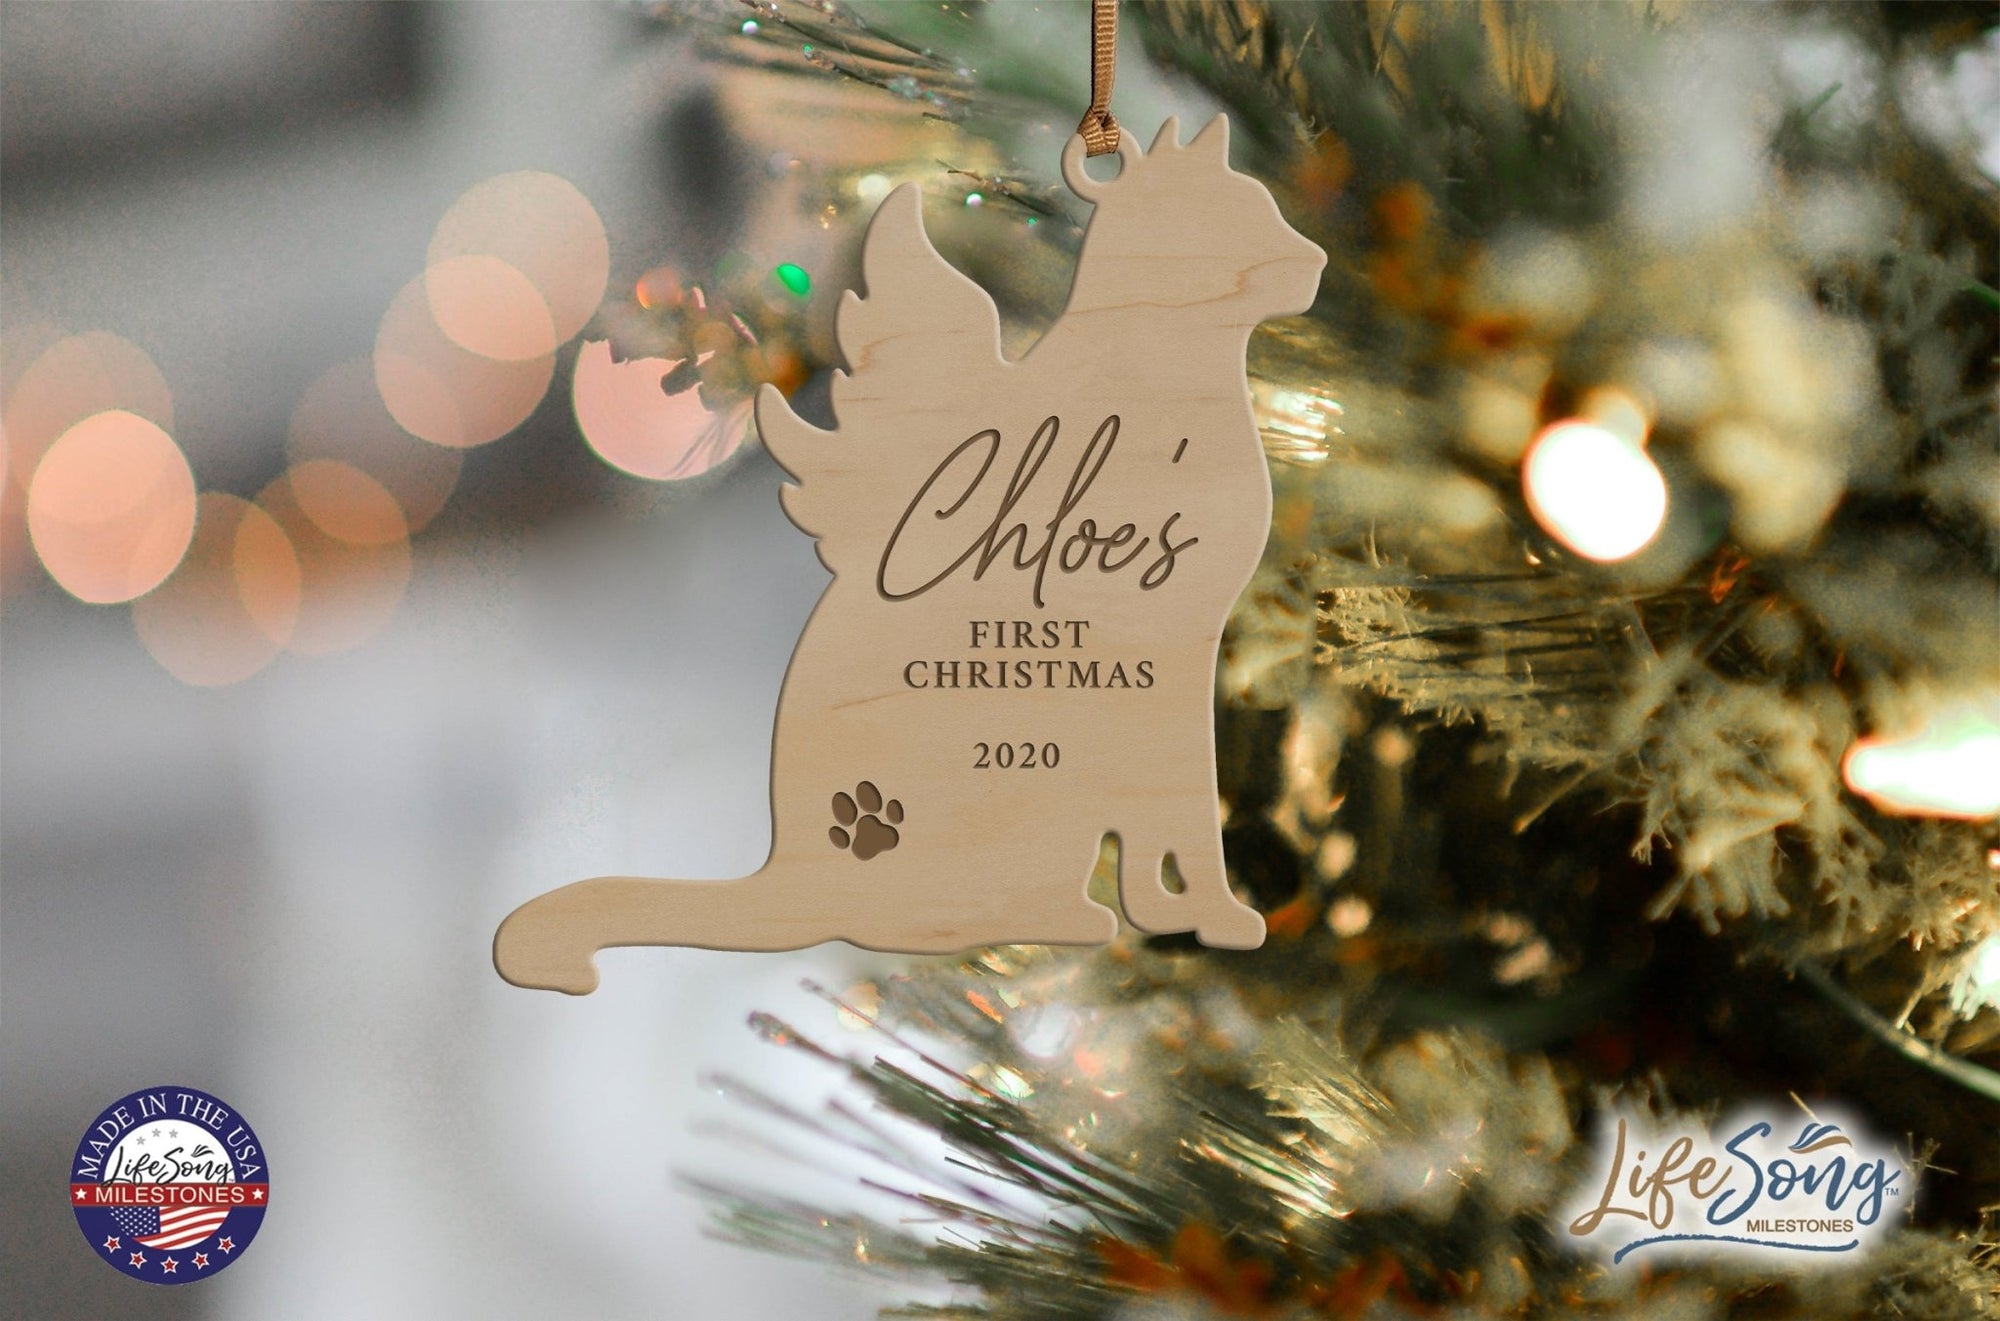 Personalized Engraved Christmas Cat Ornament 4.9375” x 5.375” x 0.125” - Christmas (PAW) - LifeSong Milestones